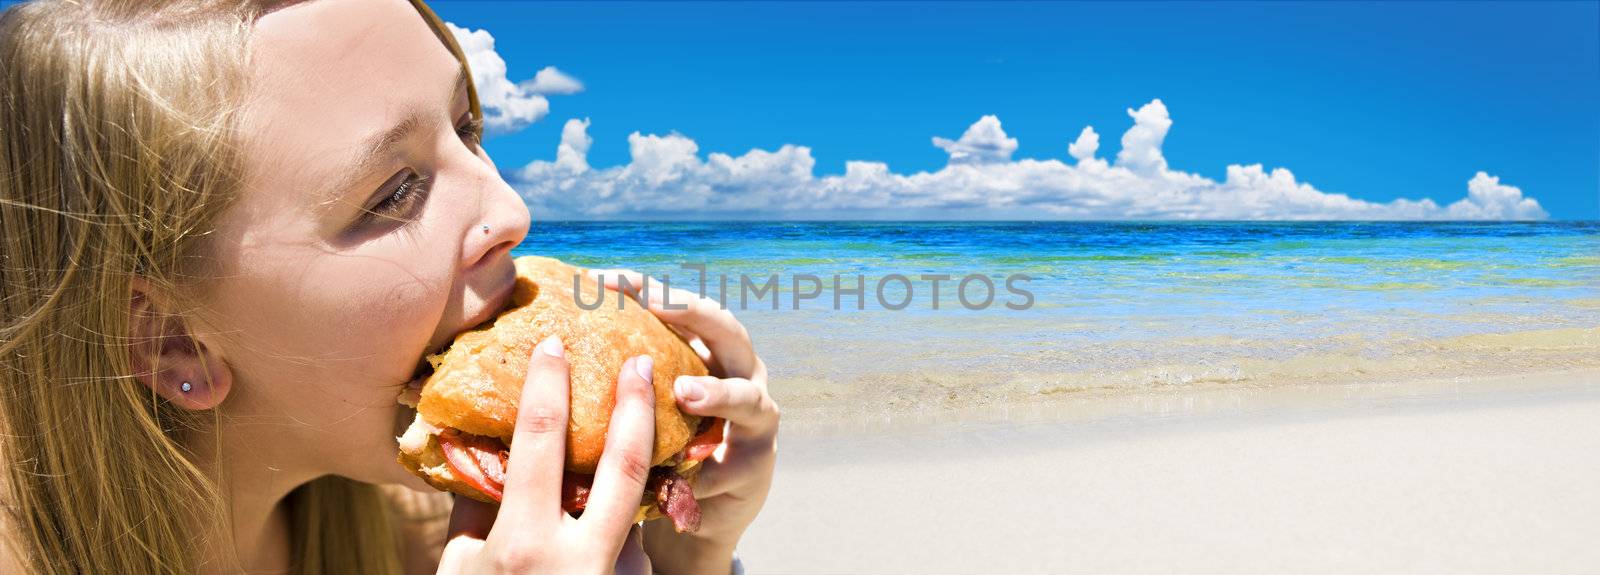 Tropical beach with young woman eating by tish1